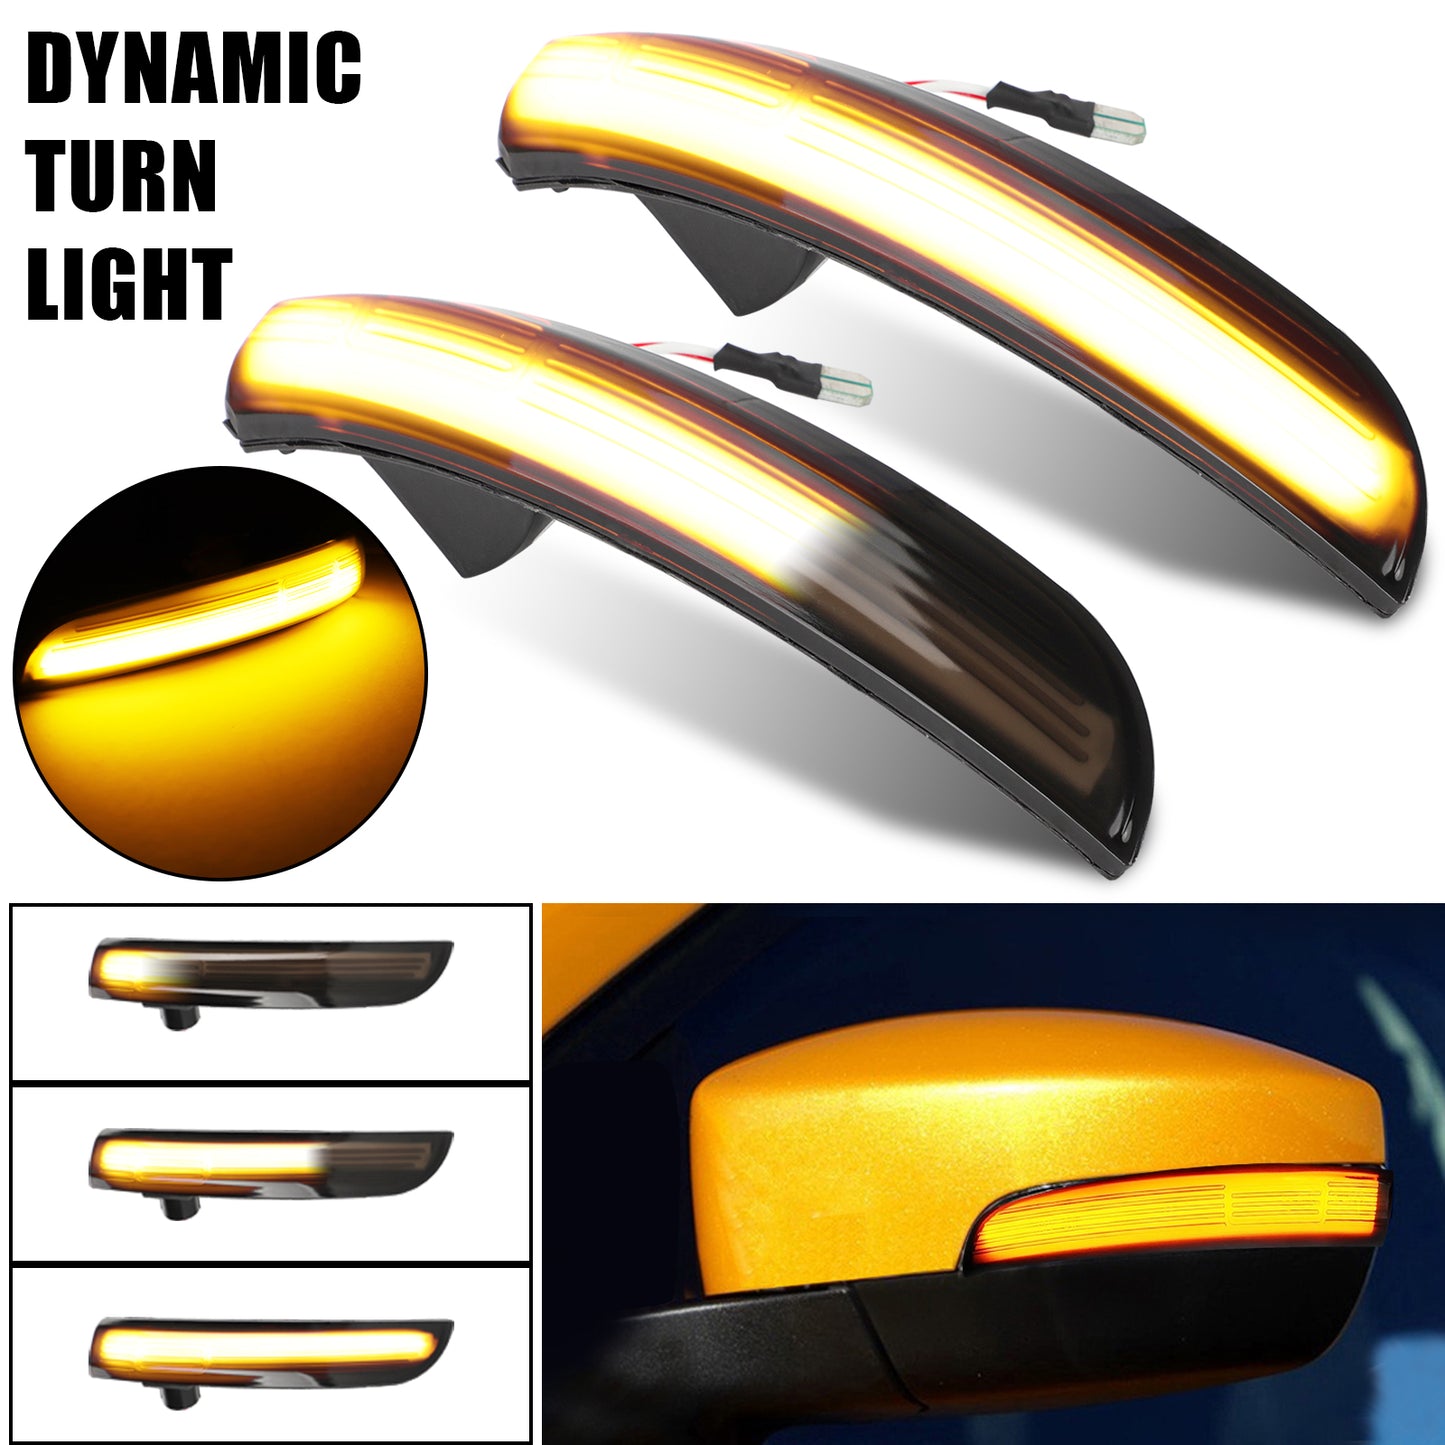 Car Side Mirror Turn Signal Lights - Premium LED Puddle Lights for Enhanced Visibility and Safety